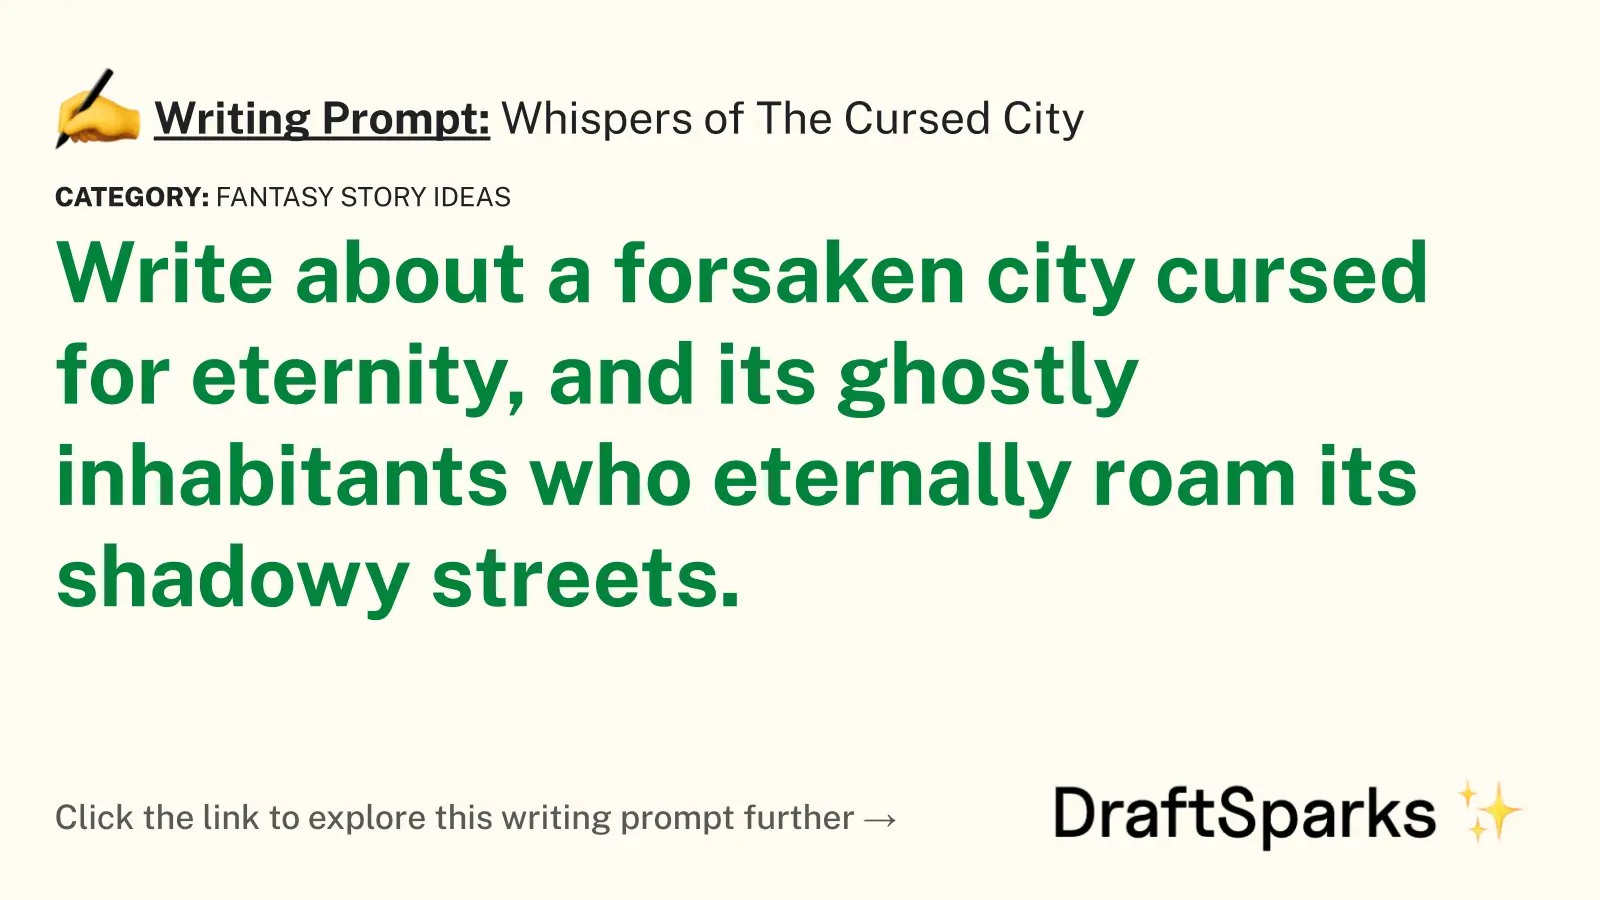 Whispers of The Cursed City